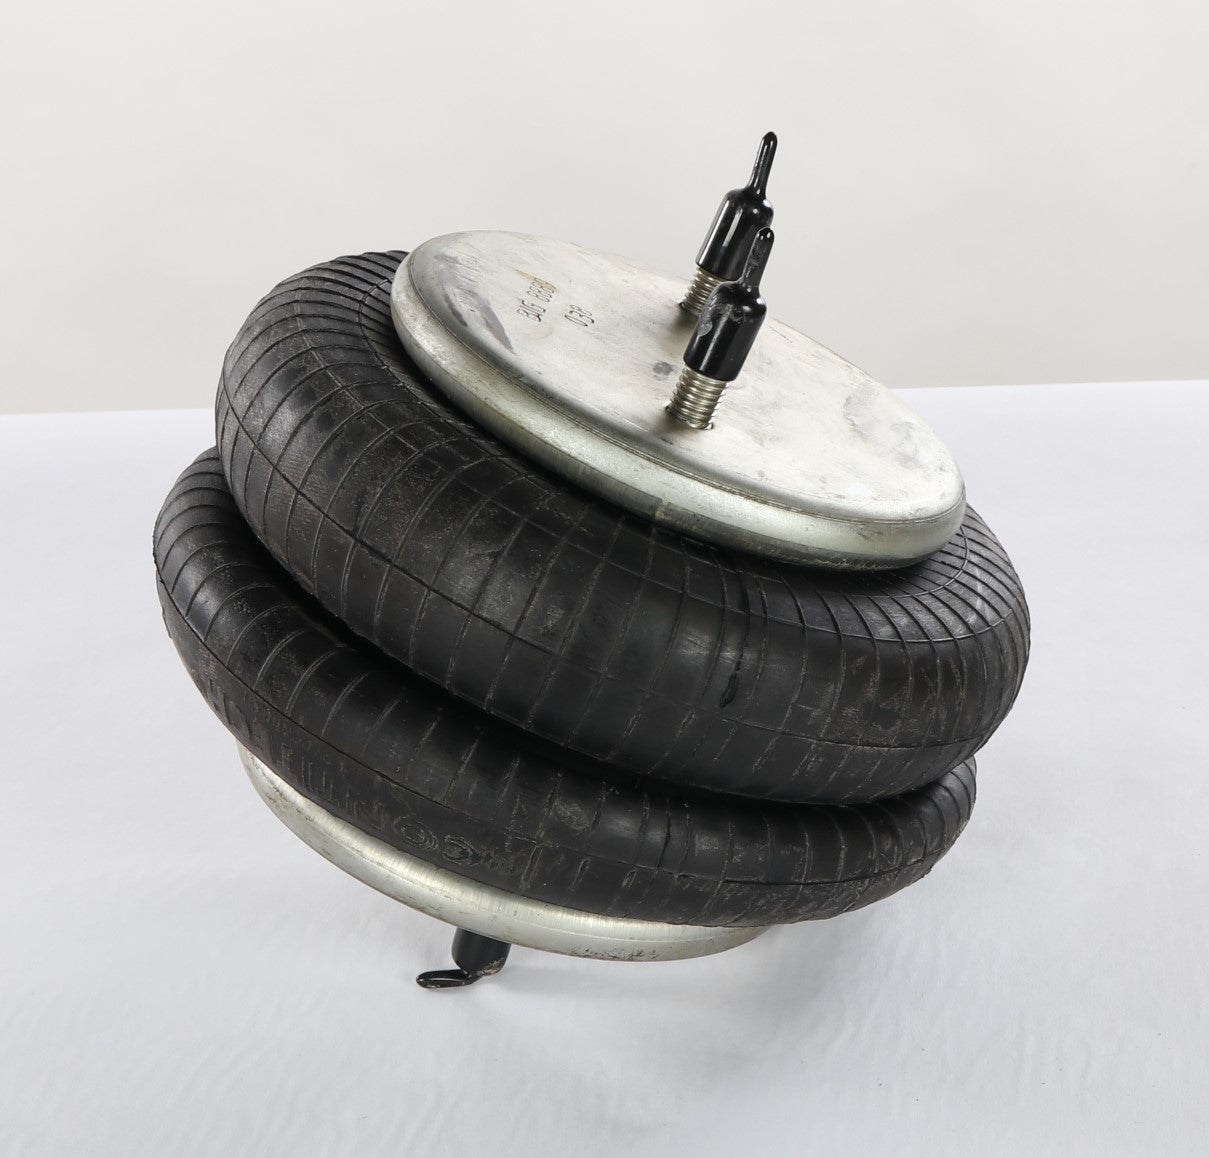 CONTINENTAL AG - CONTITECH/ELITE/GOODYEAR/ROULUNDS ­-­ FD 200-19 448 ­-­ AIR SPRING